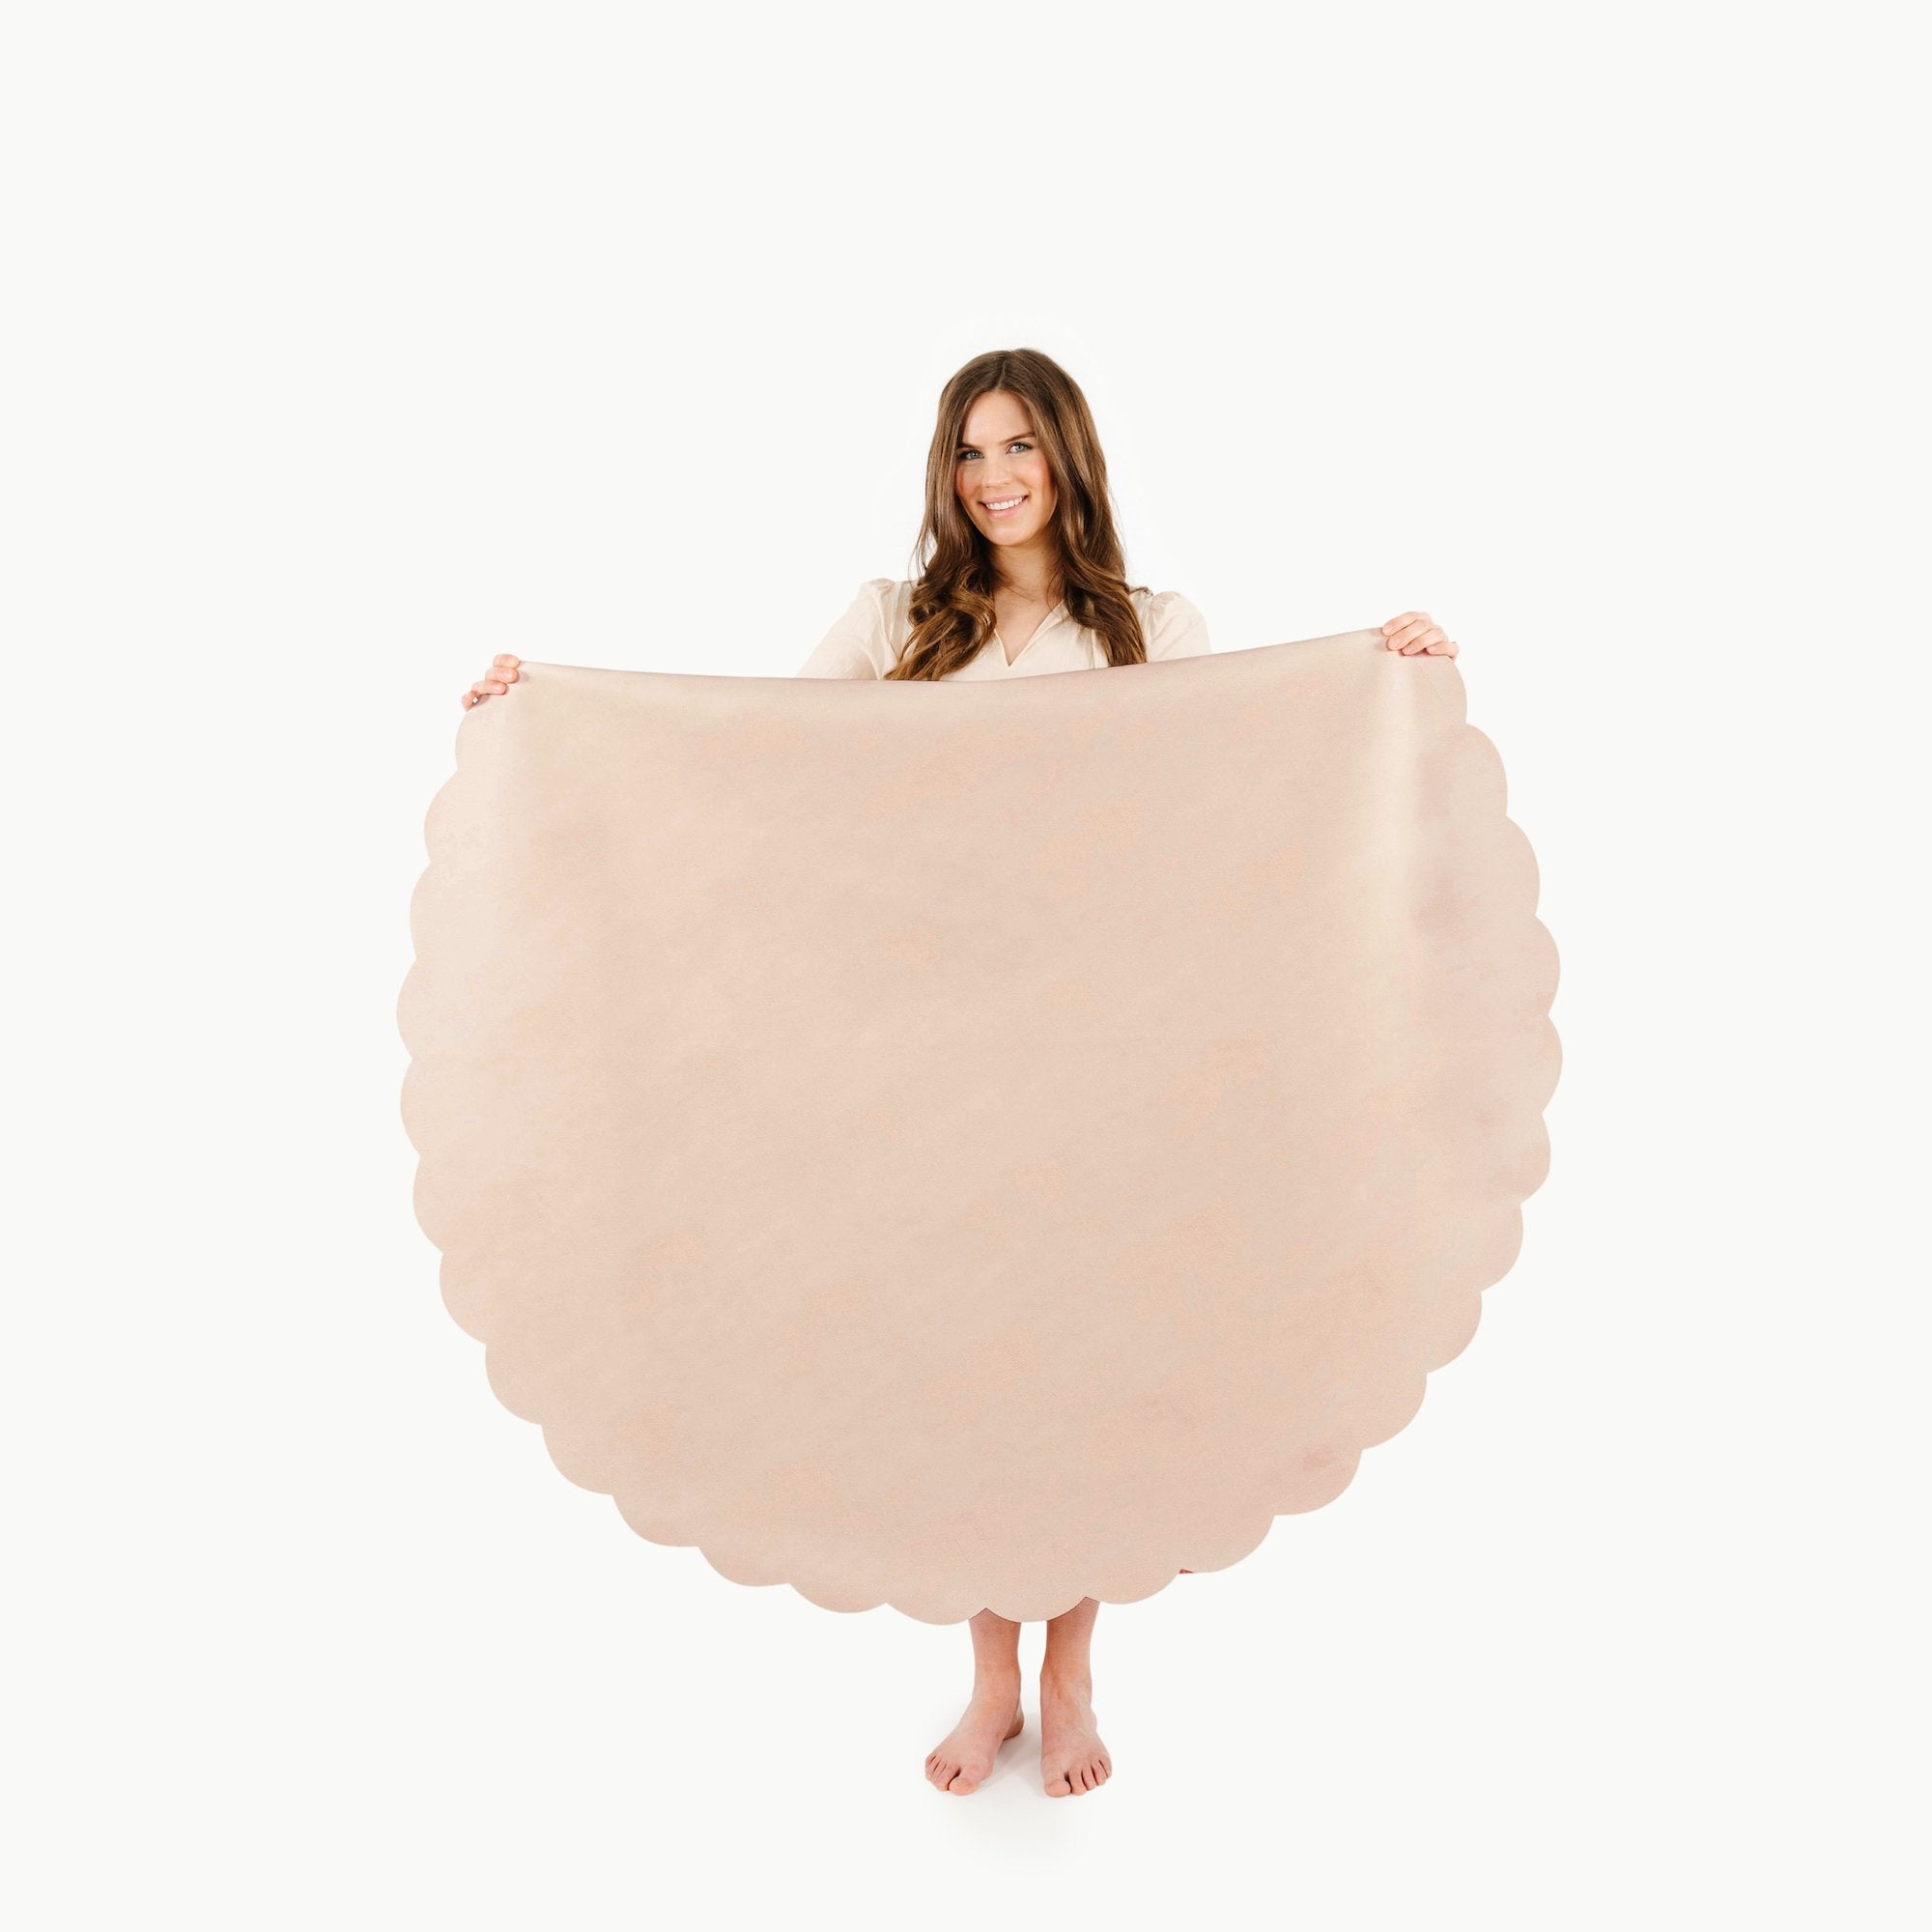 Untanned Scallop (on sale) / Circle@Woman holding the Untanned Scallop Circle Midi Mat